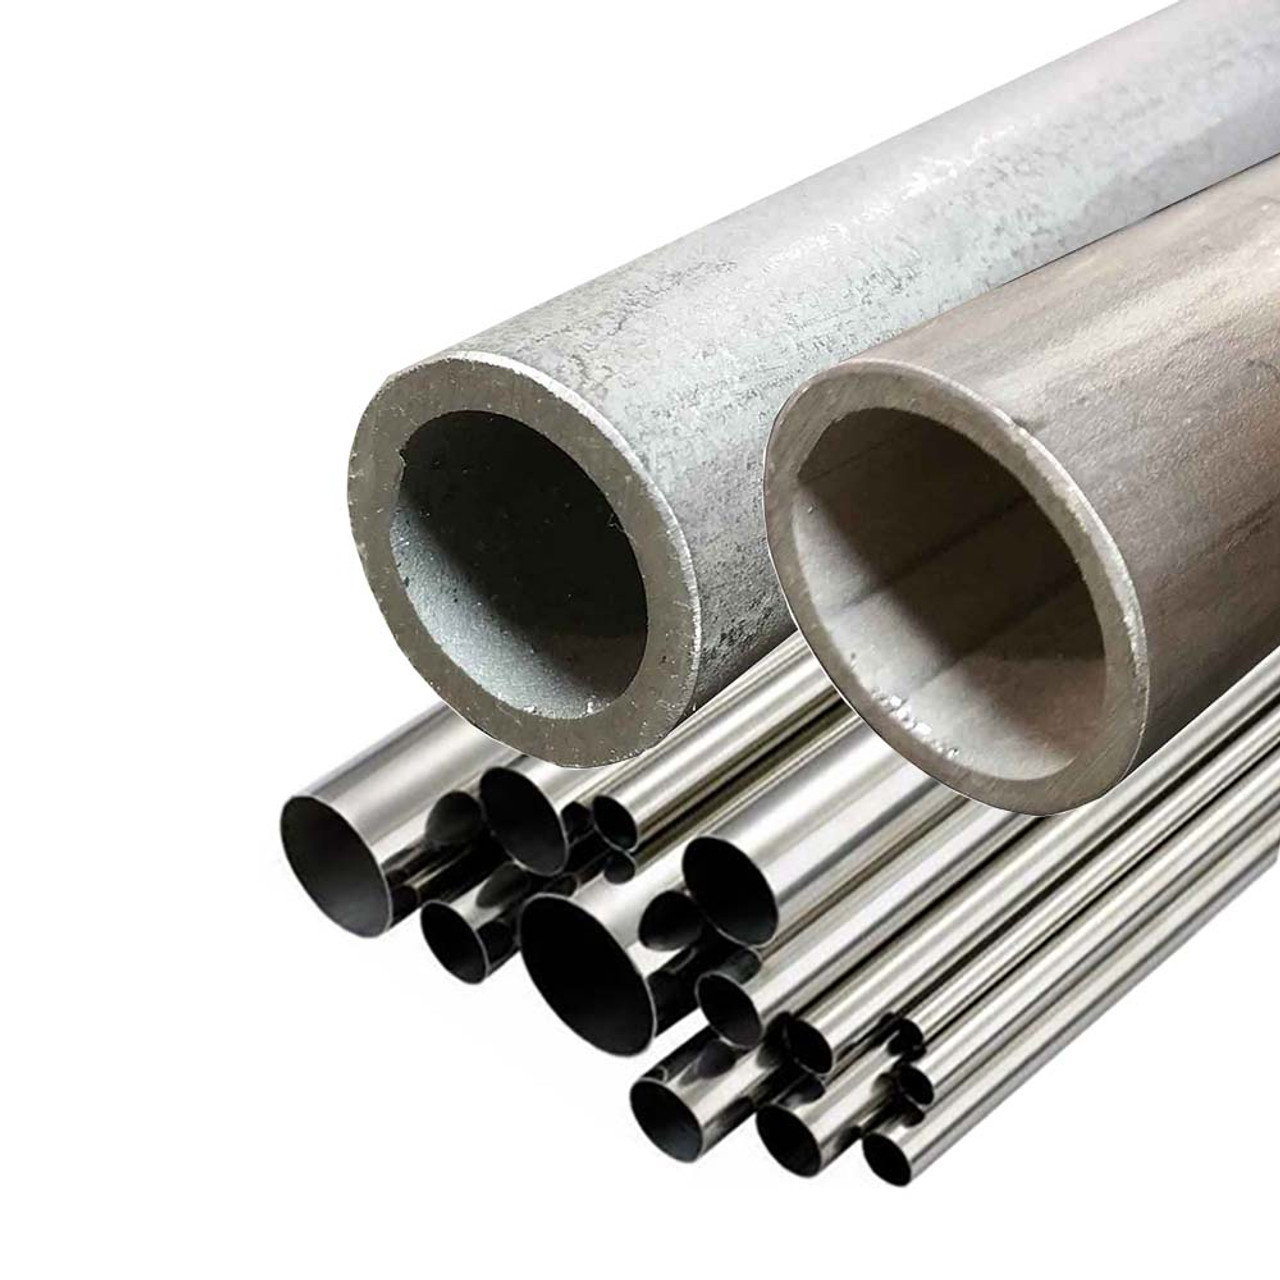 0.750" OD x 0.049" Wall x 12 inches, 304 Stainless Steel Round Tube, Welded